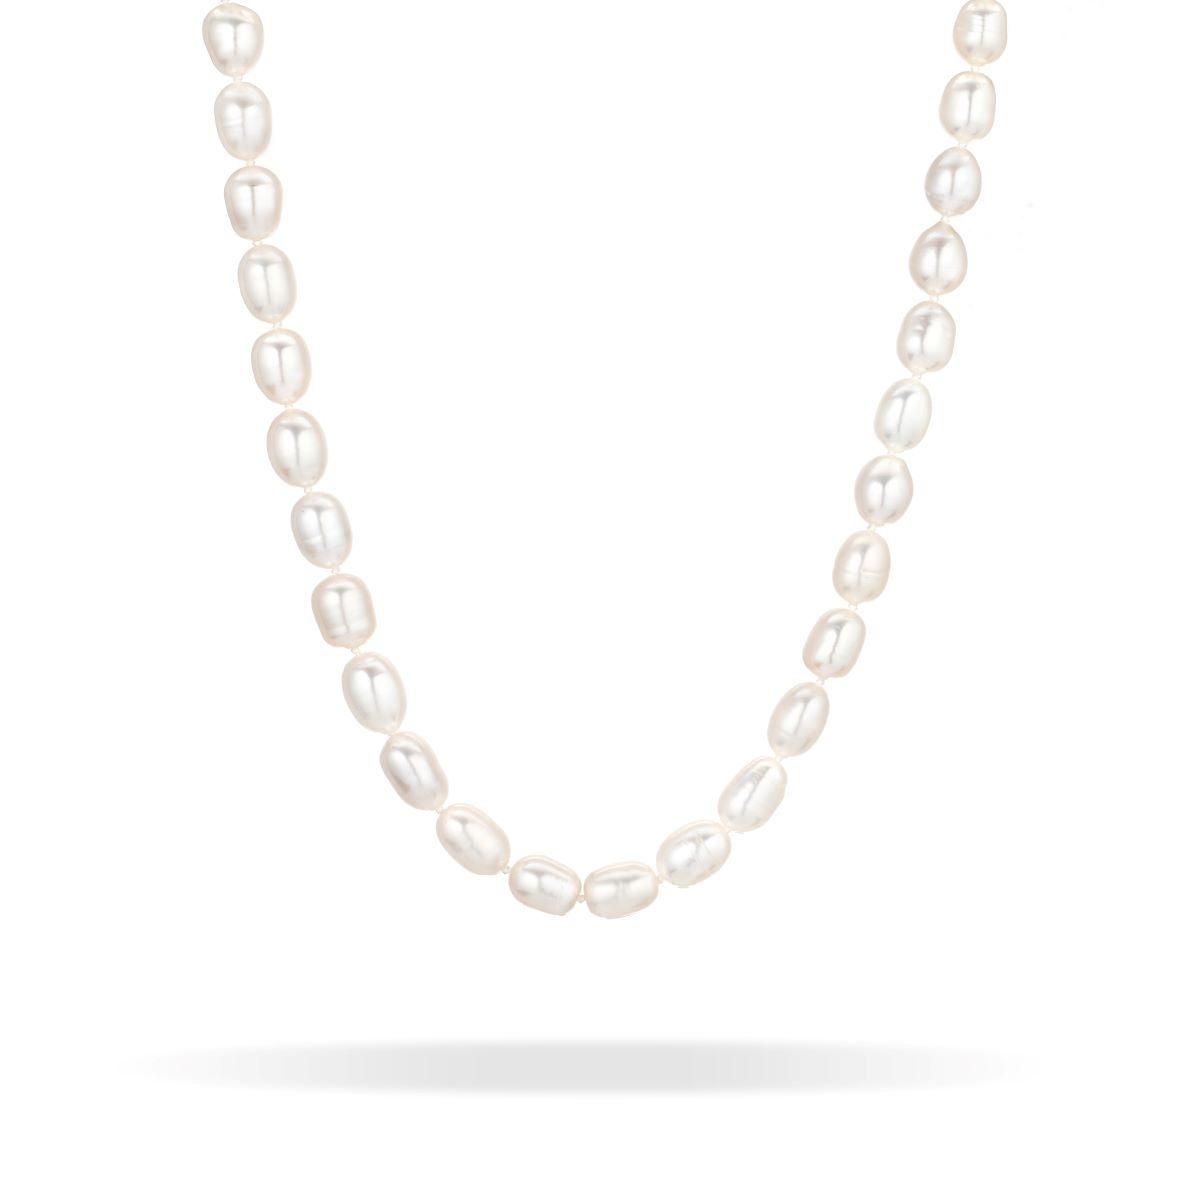 XL Seed Pearl Necklace in Sterling Silver